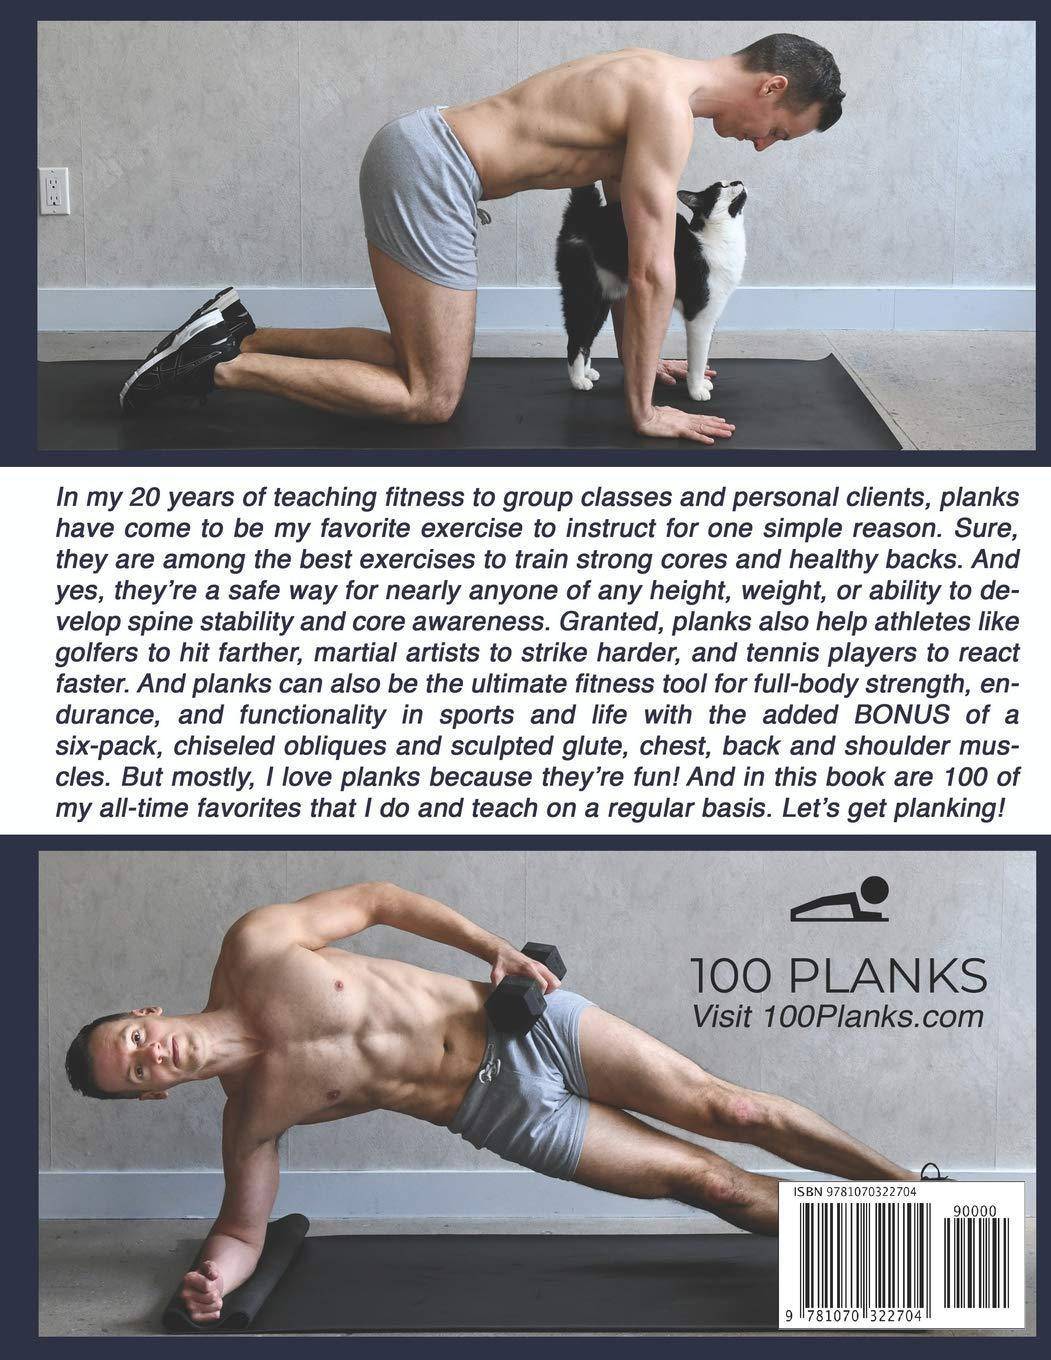 100 Planks: The Plank Encyclopedia for Back Health, Bodyweight T - CA Corrections Bookstore